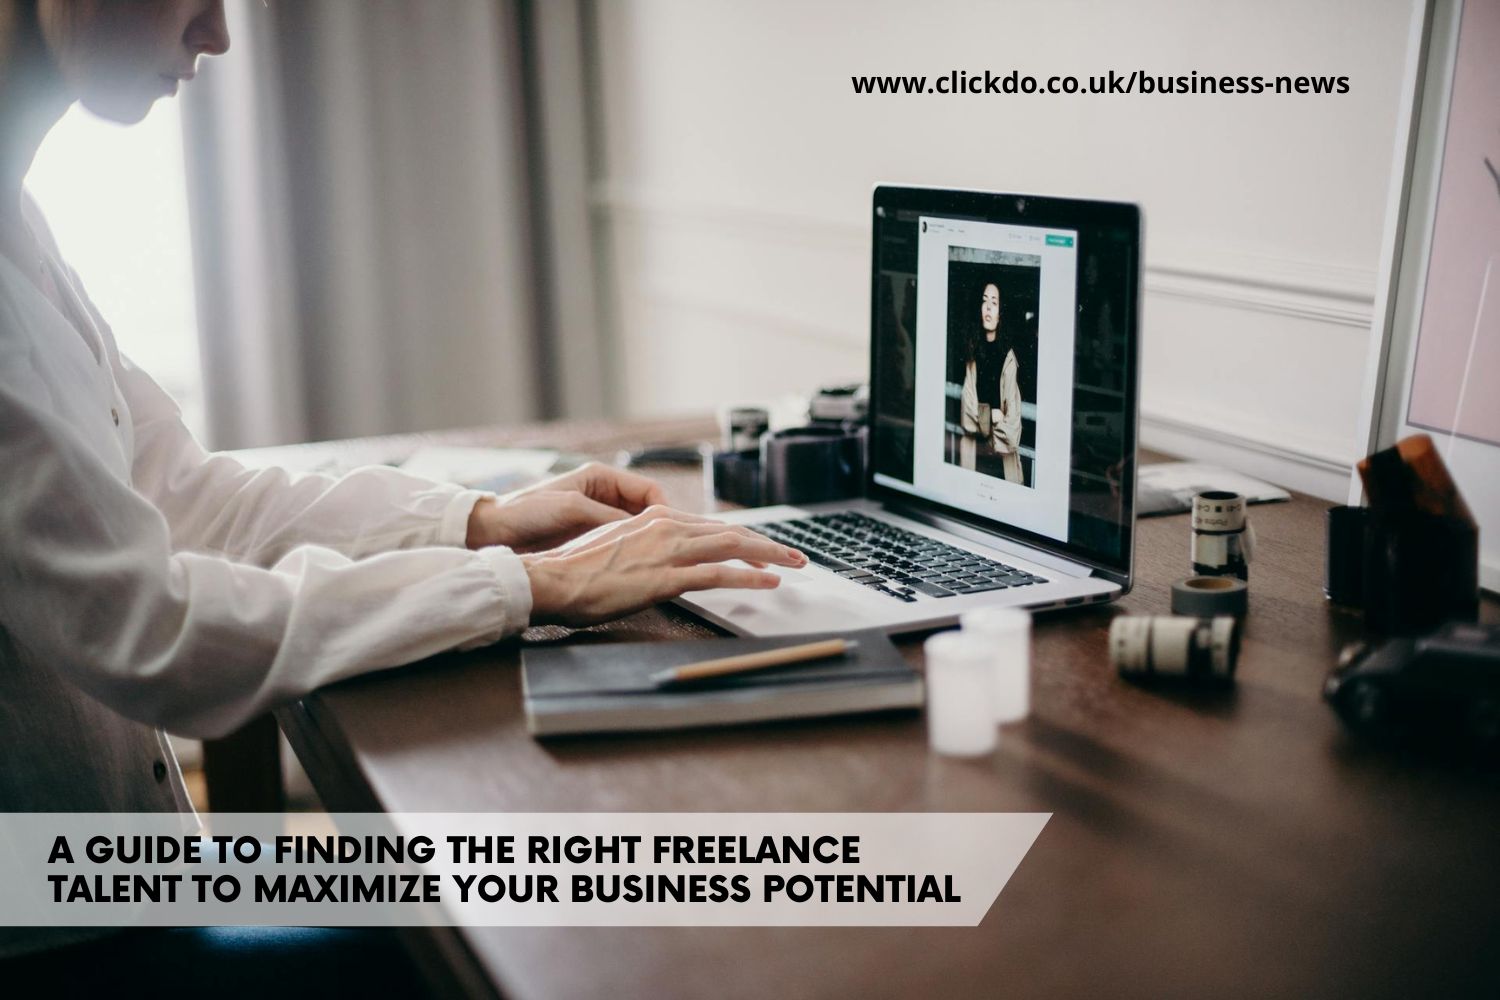 how-to-find-freelance-talent-to-maximise-business-potential